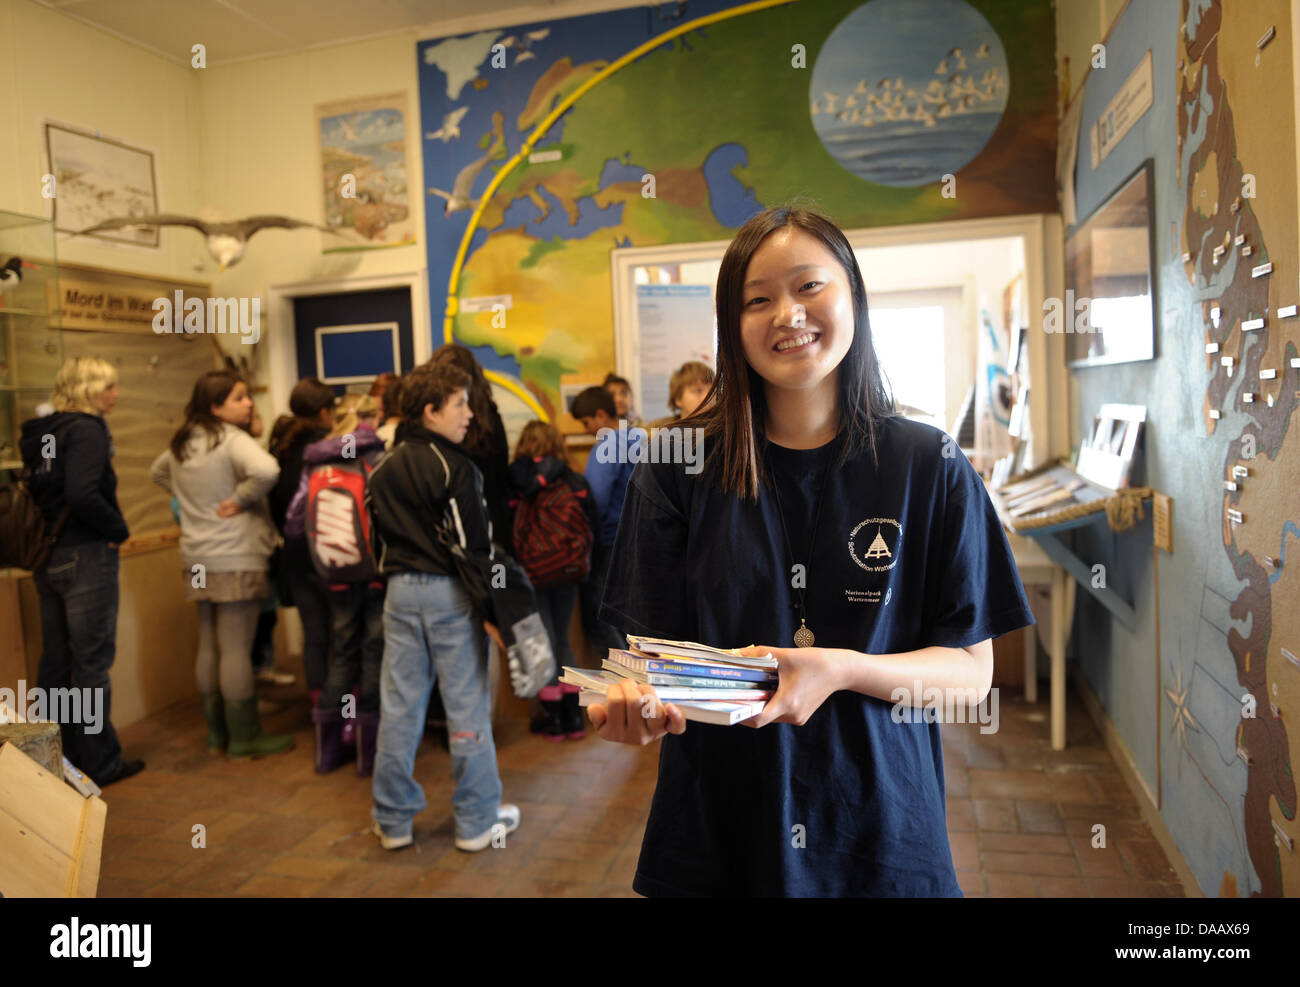 South Korean student, Dschi in Ha, smiles as she stands next to a group of visitors at the Wadden Sea Conservation Station in Hoernum on the island of Sylt, Germany, 15 September 2011. The 22-year old German Studies student  is working a volonteer at the station for two months. Photo: Christian Charisius Stock Photo